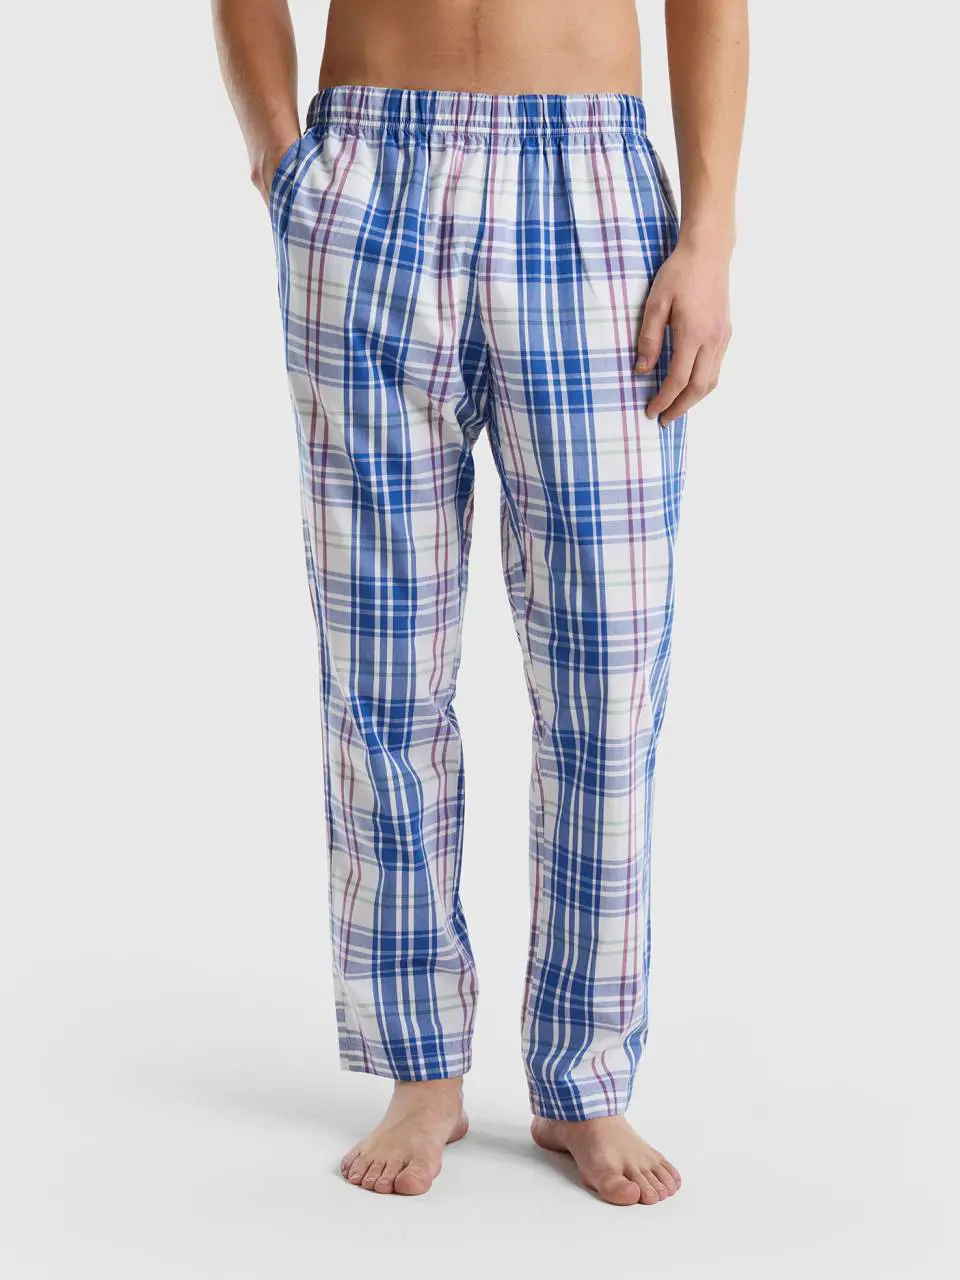 Benetton check trousers in 100% cotton. 1